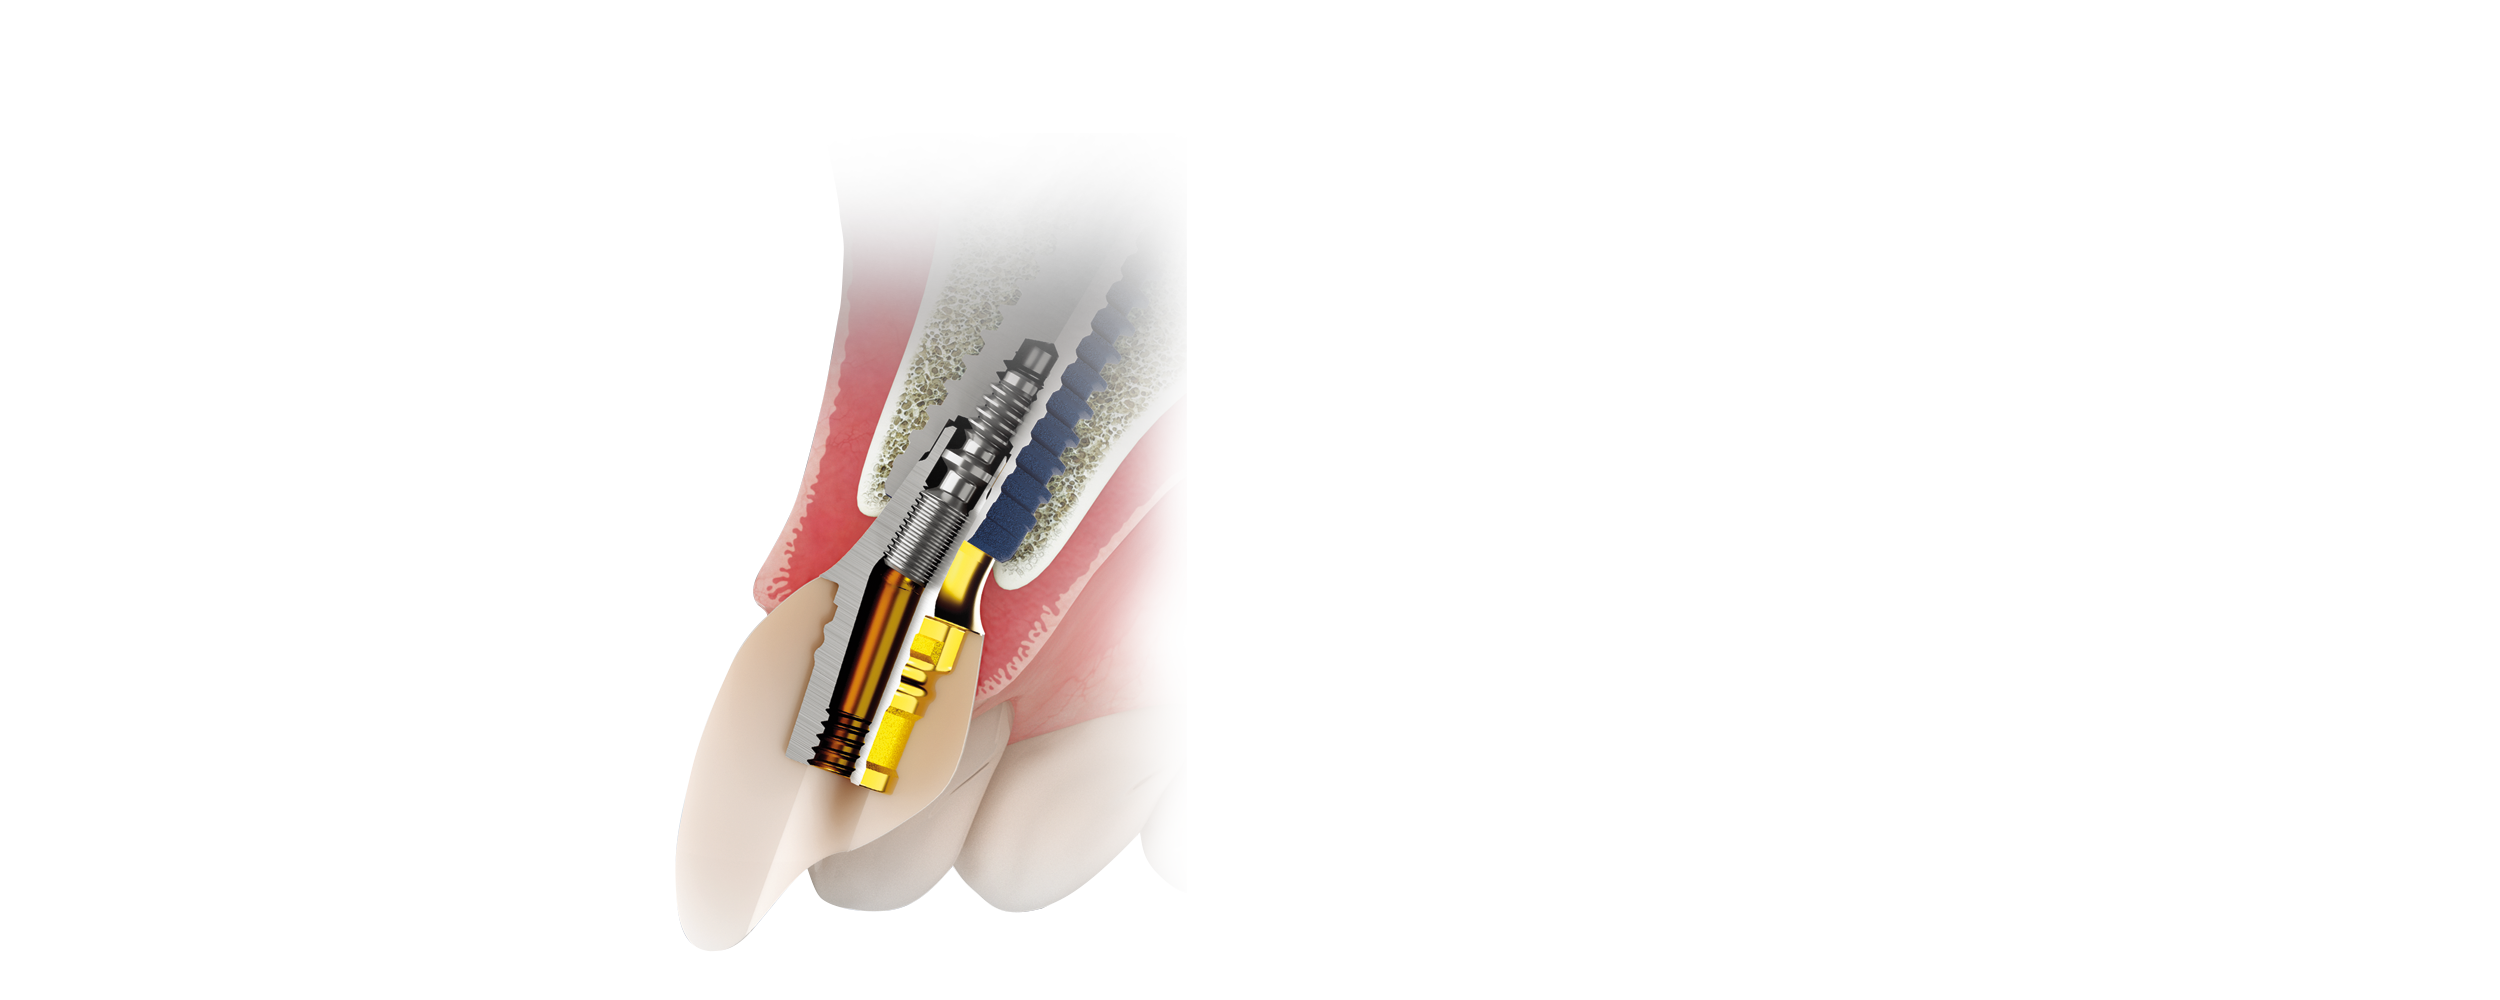 rcbase-product-cover2